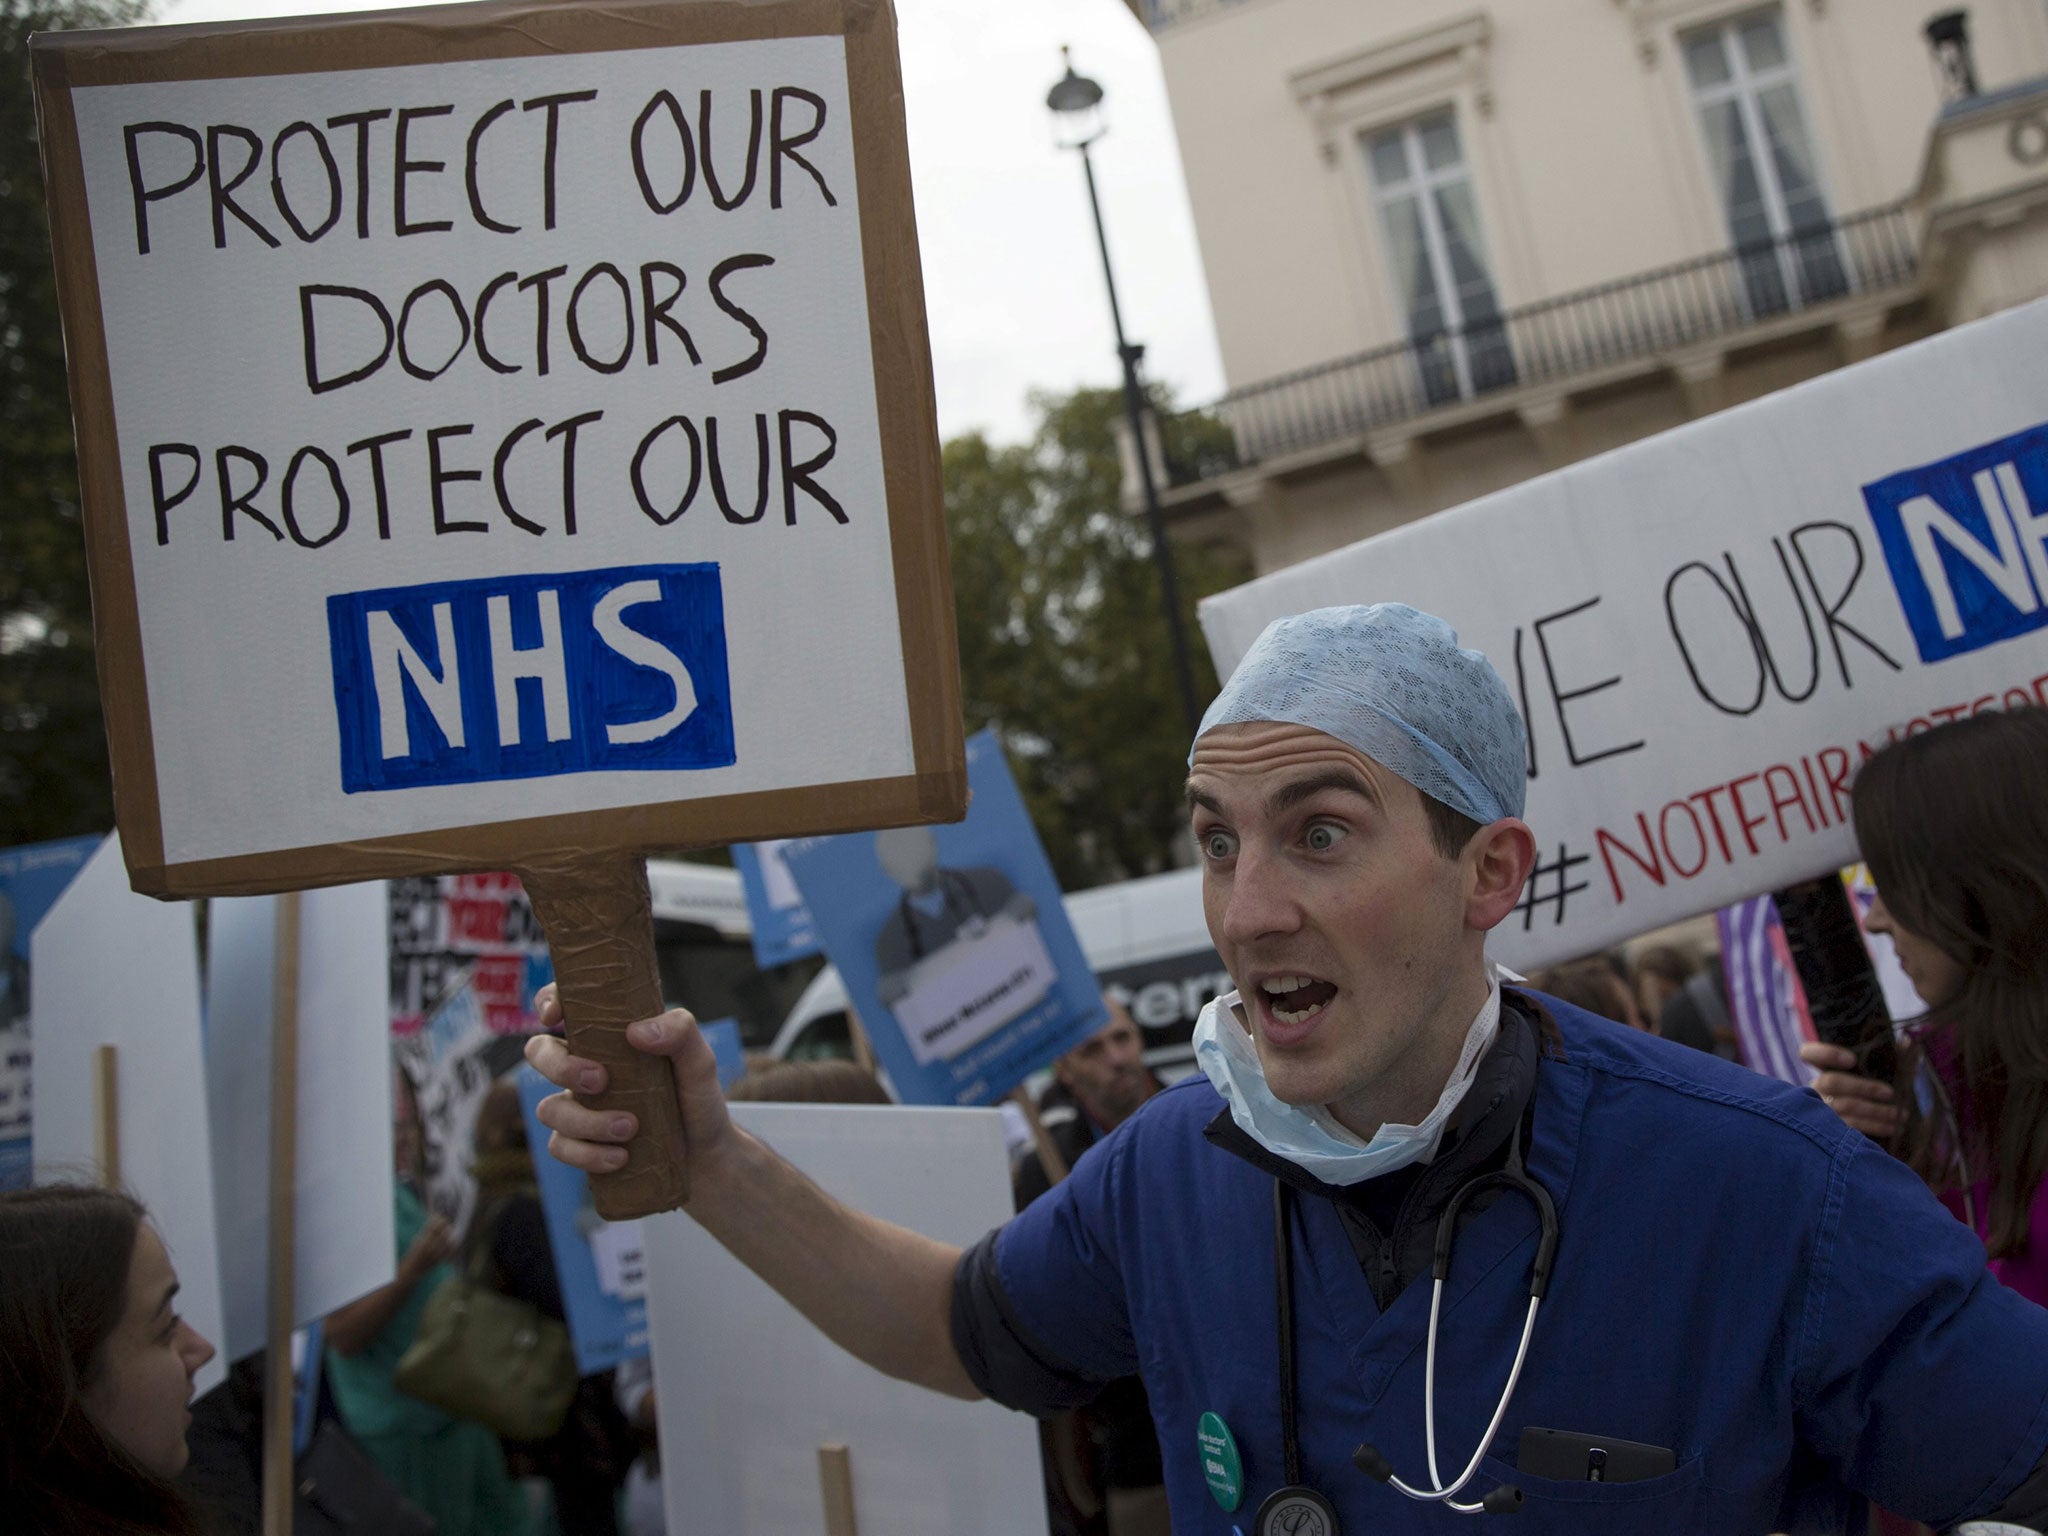 Demonstrators march down Whitehall during the 'Let's Save the NHS' protest by junior doctors in London last month